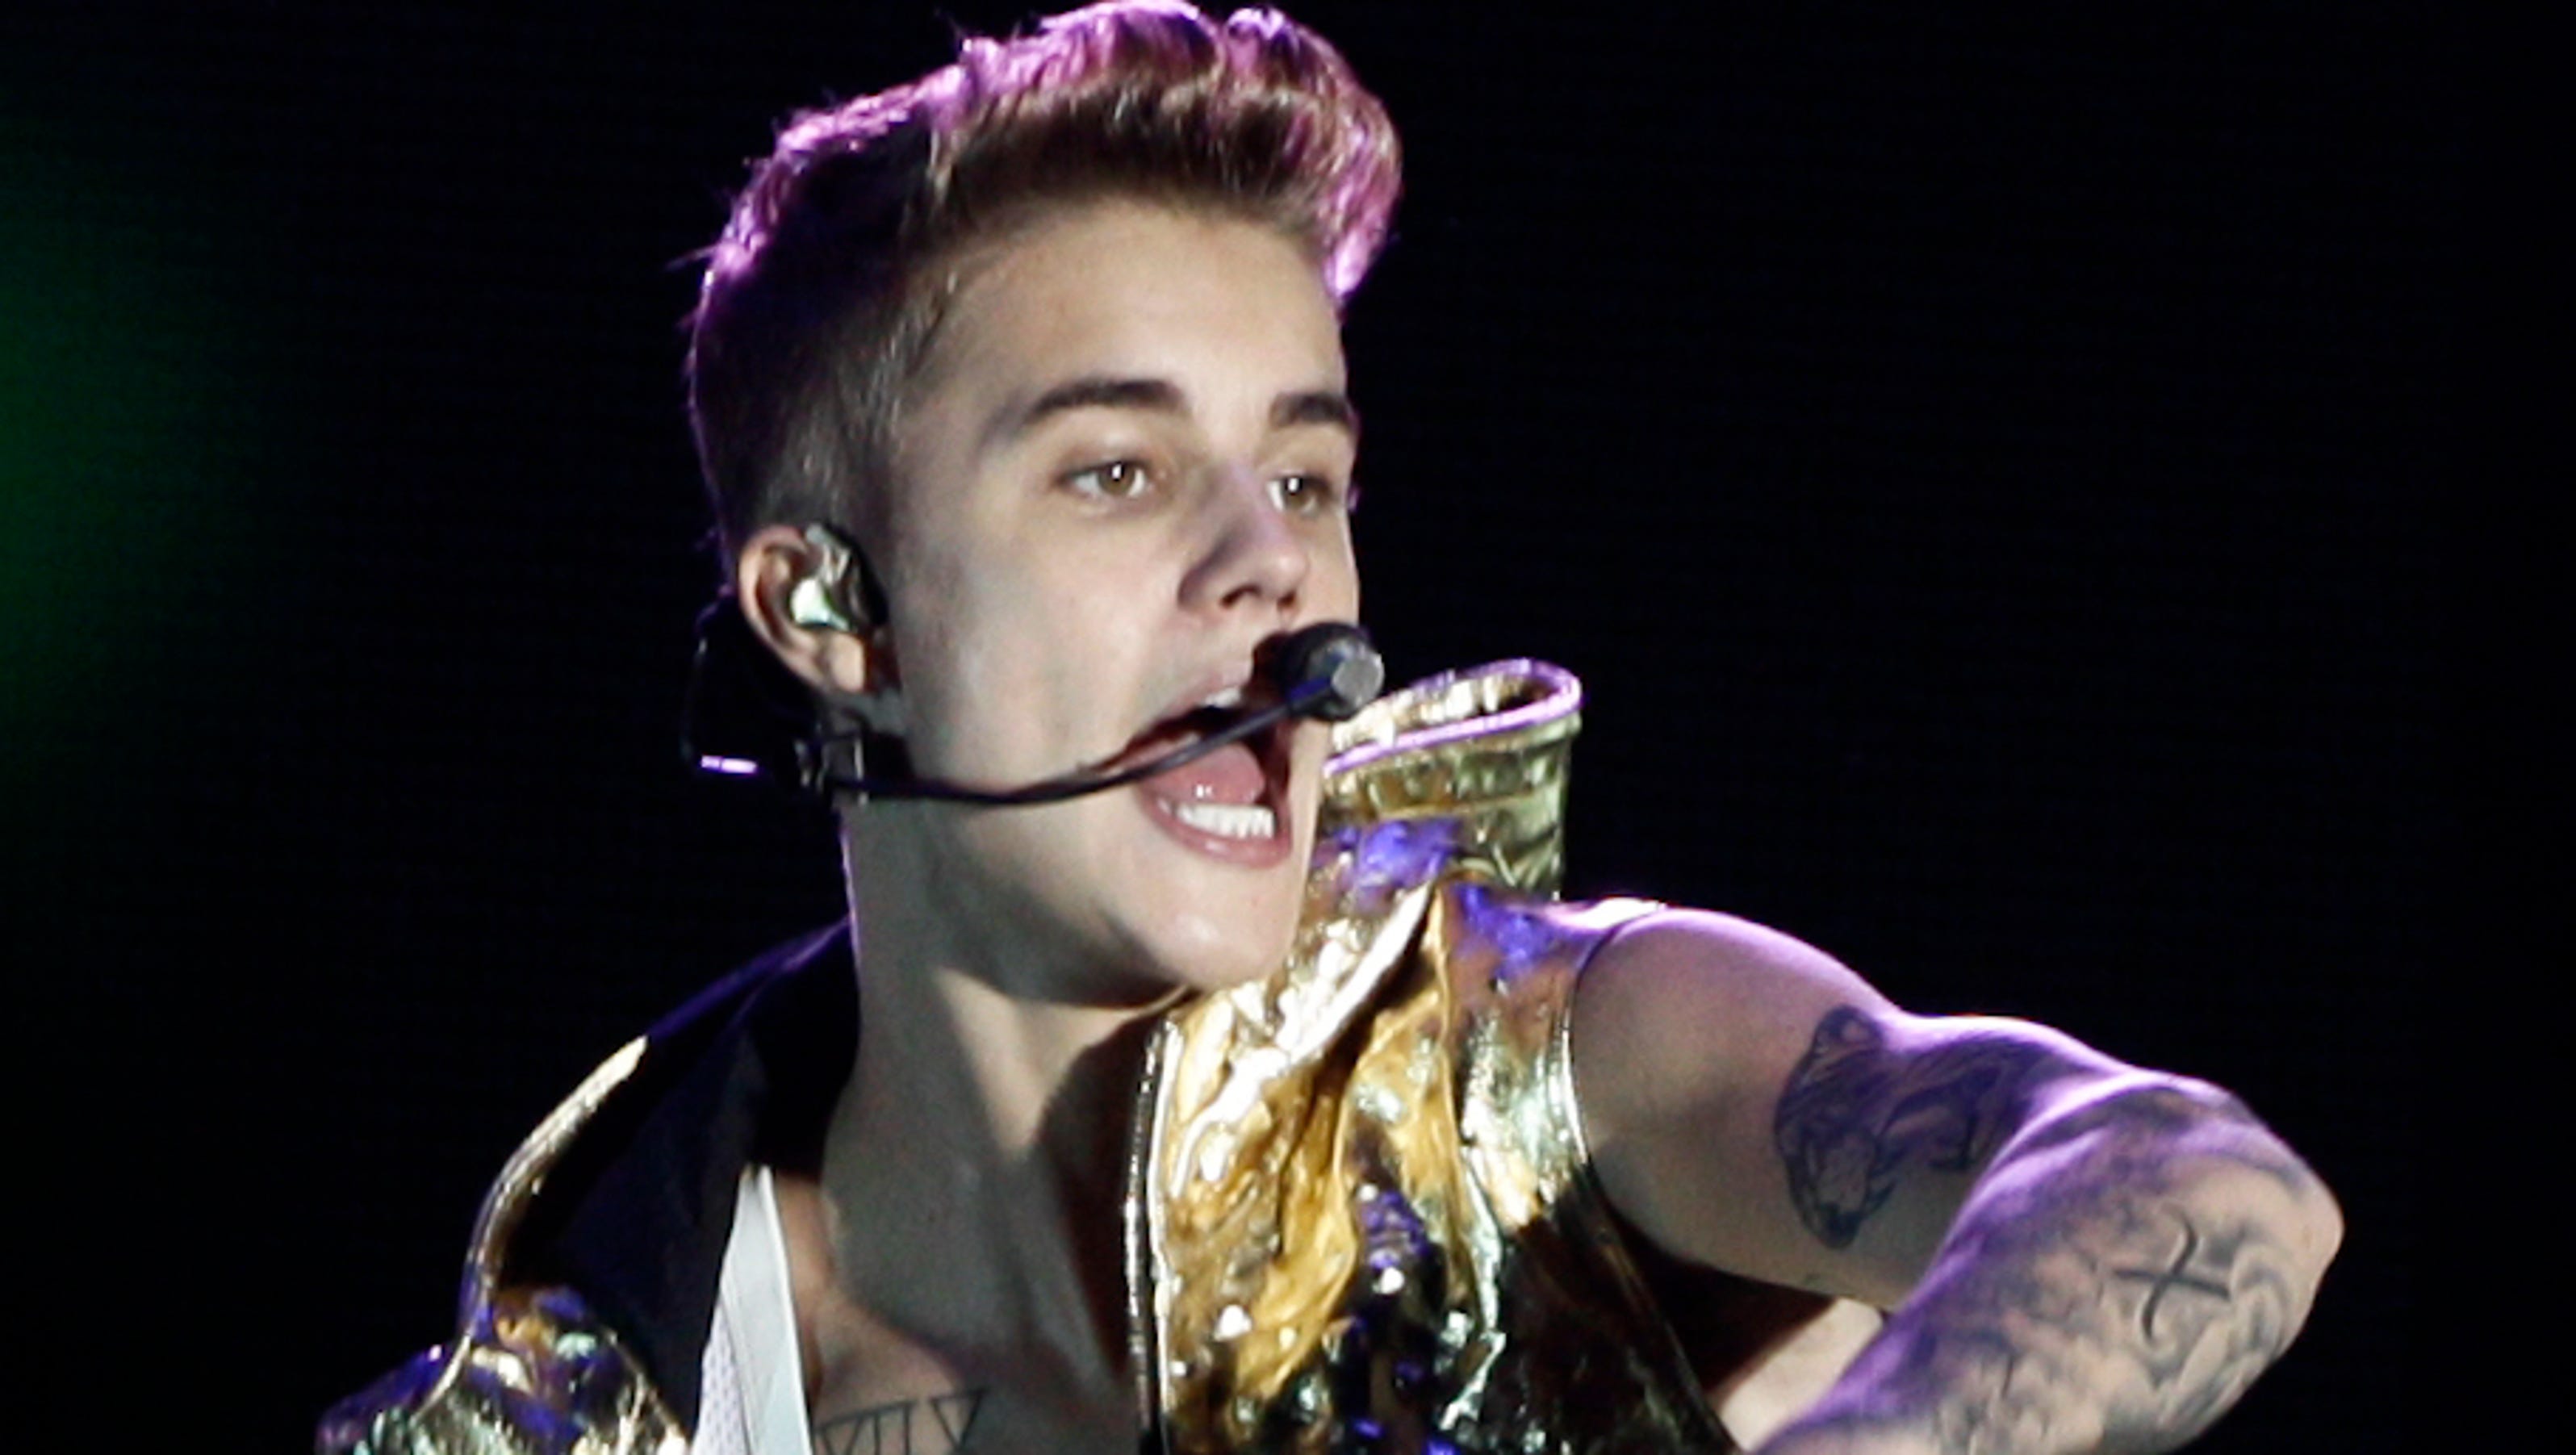 Justin Bieber storms off stage3200 x 1800